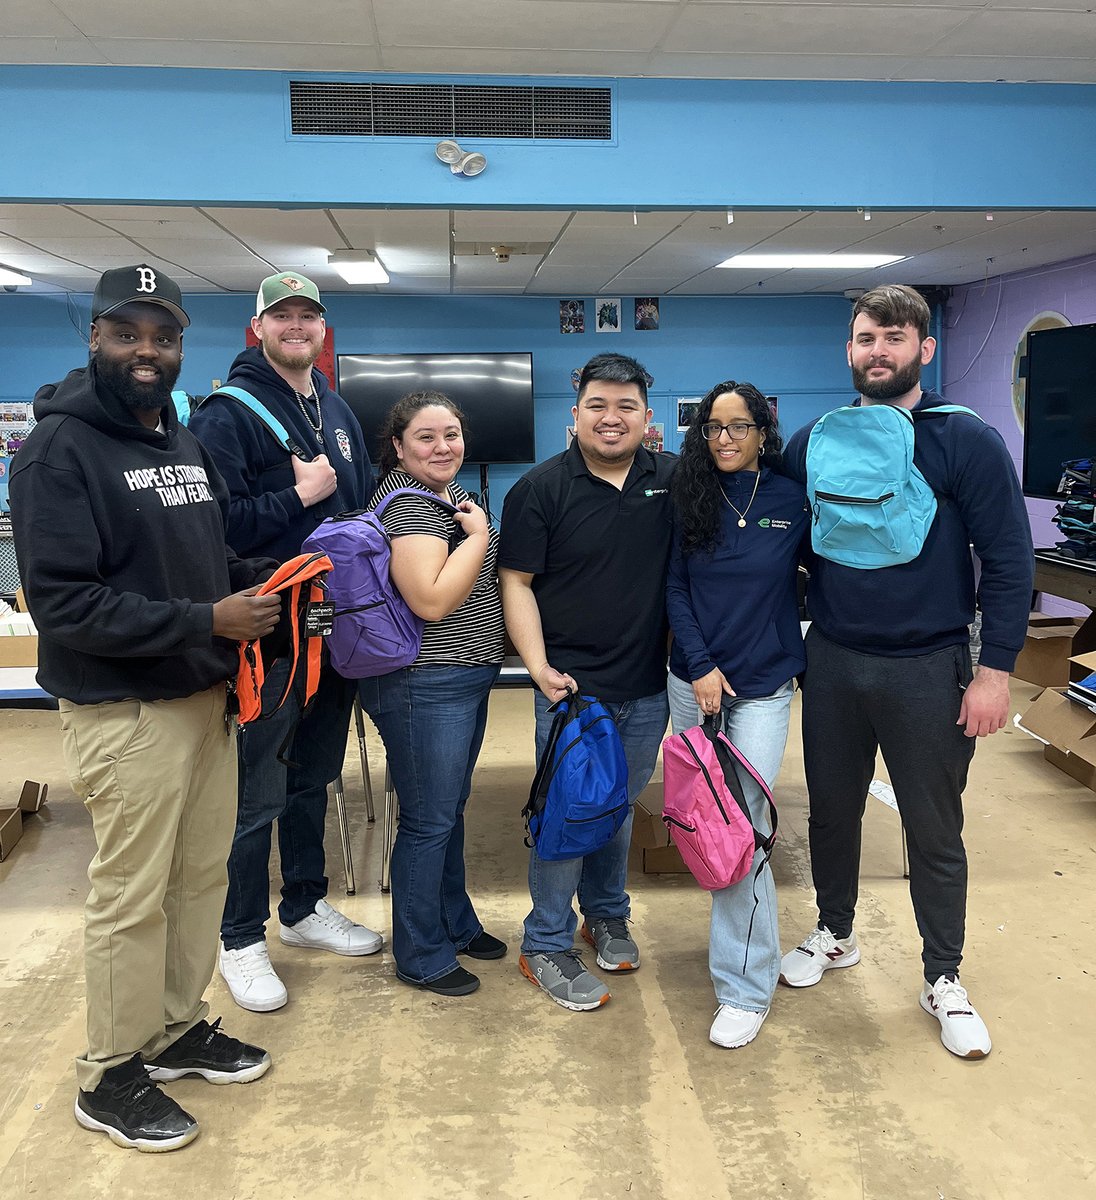 Enterprise Mobility volunteers stopped by BGCD to help assemble STEM Backpacks for our members! 🎒 The backpacks included all types of school and STEM supplies for members to take home. Thanks to our friends at @Enterprise Mobility for their ongoing support! #WeAreDorchester